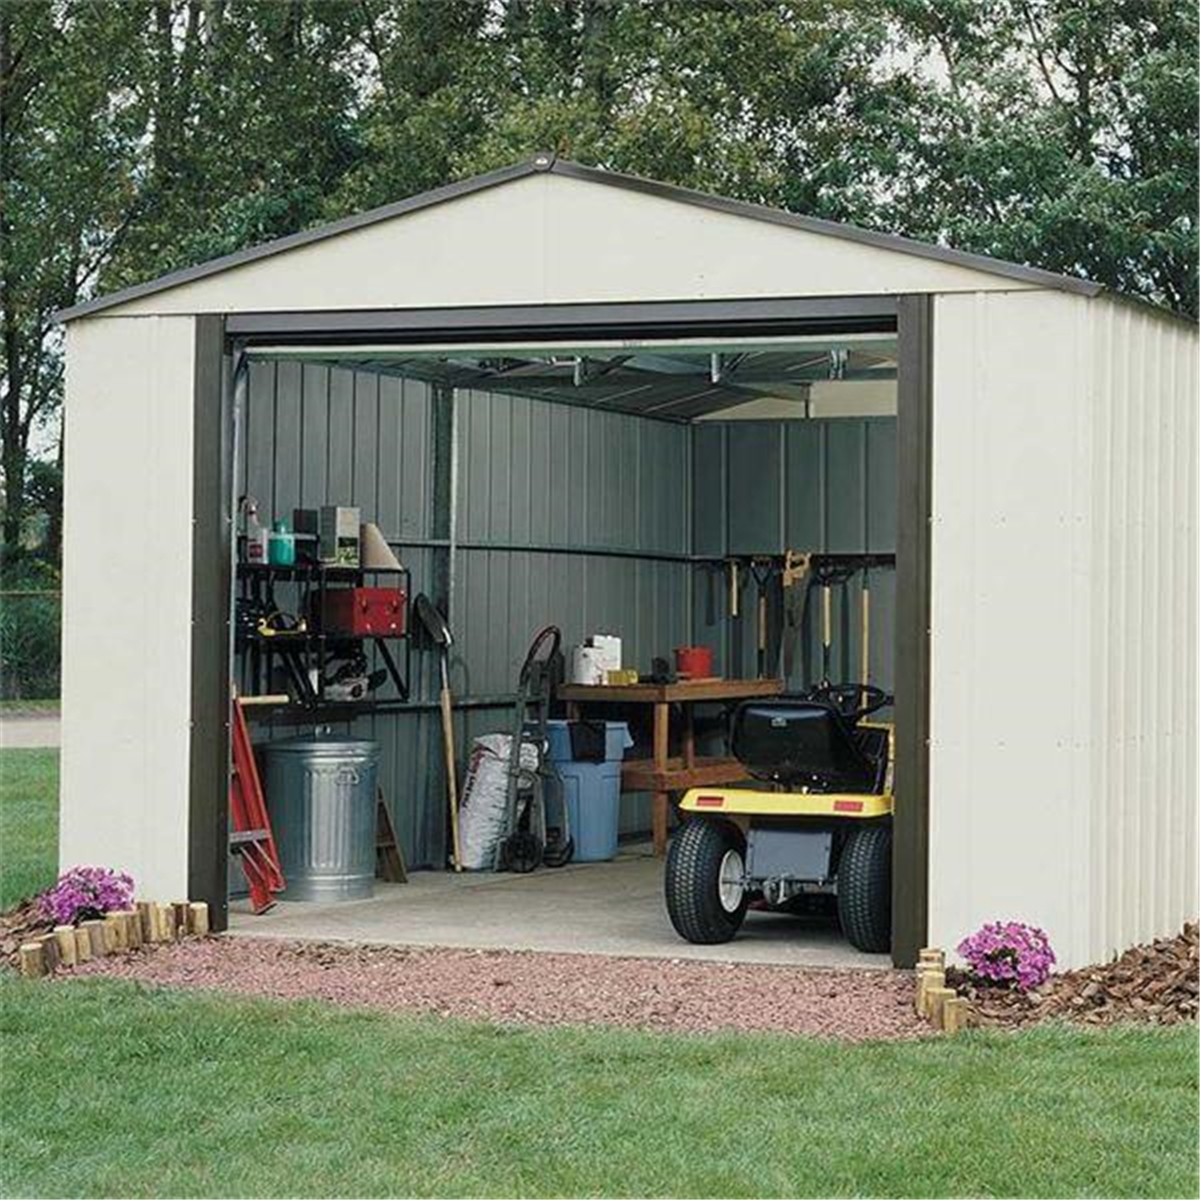 10 x 8 deluxe woodvale metal shed 313m x 242m Best Price from I like 